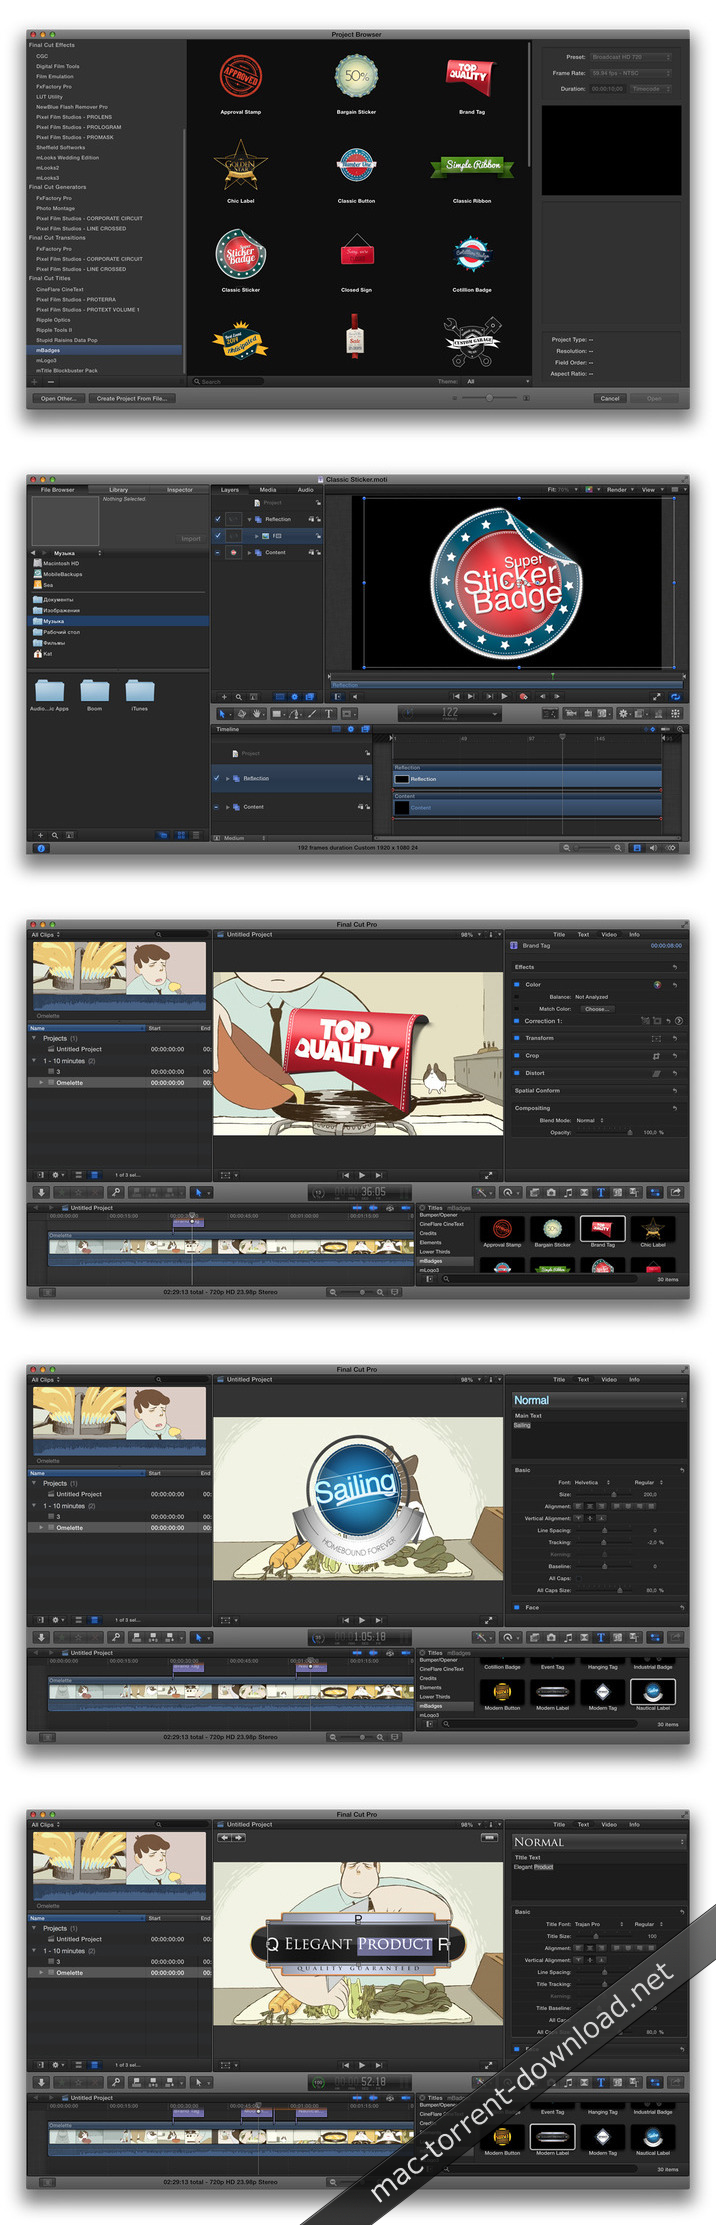 motionvfx_mbadges_30_high_quality_labels_for_motion_5_and_final_cut_pro_x